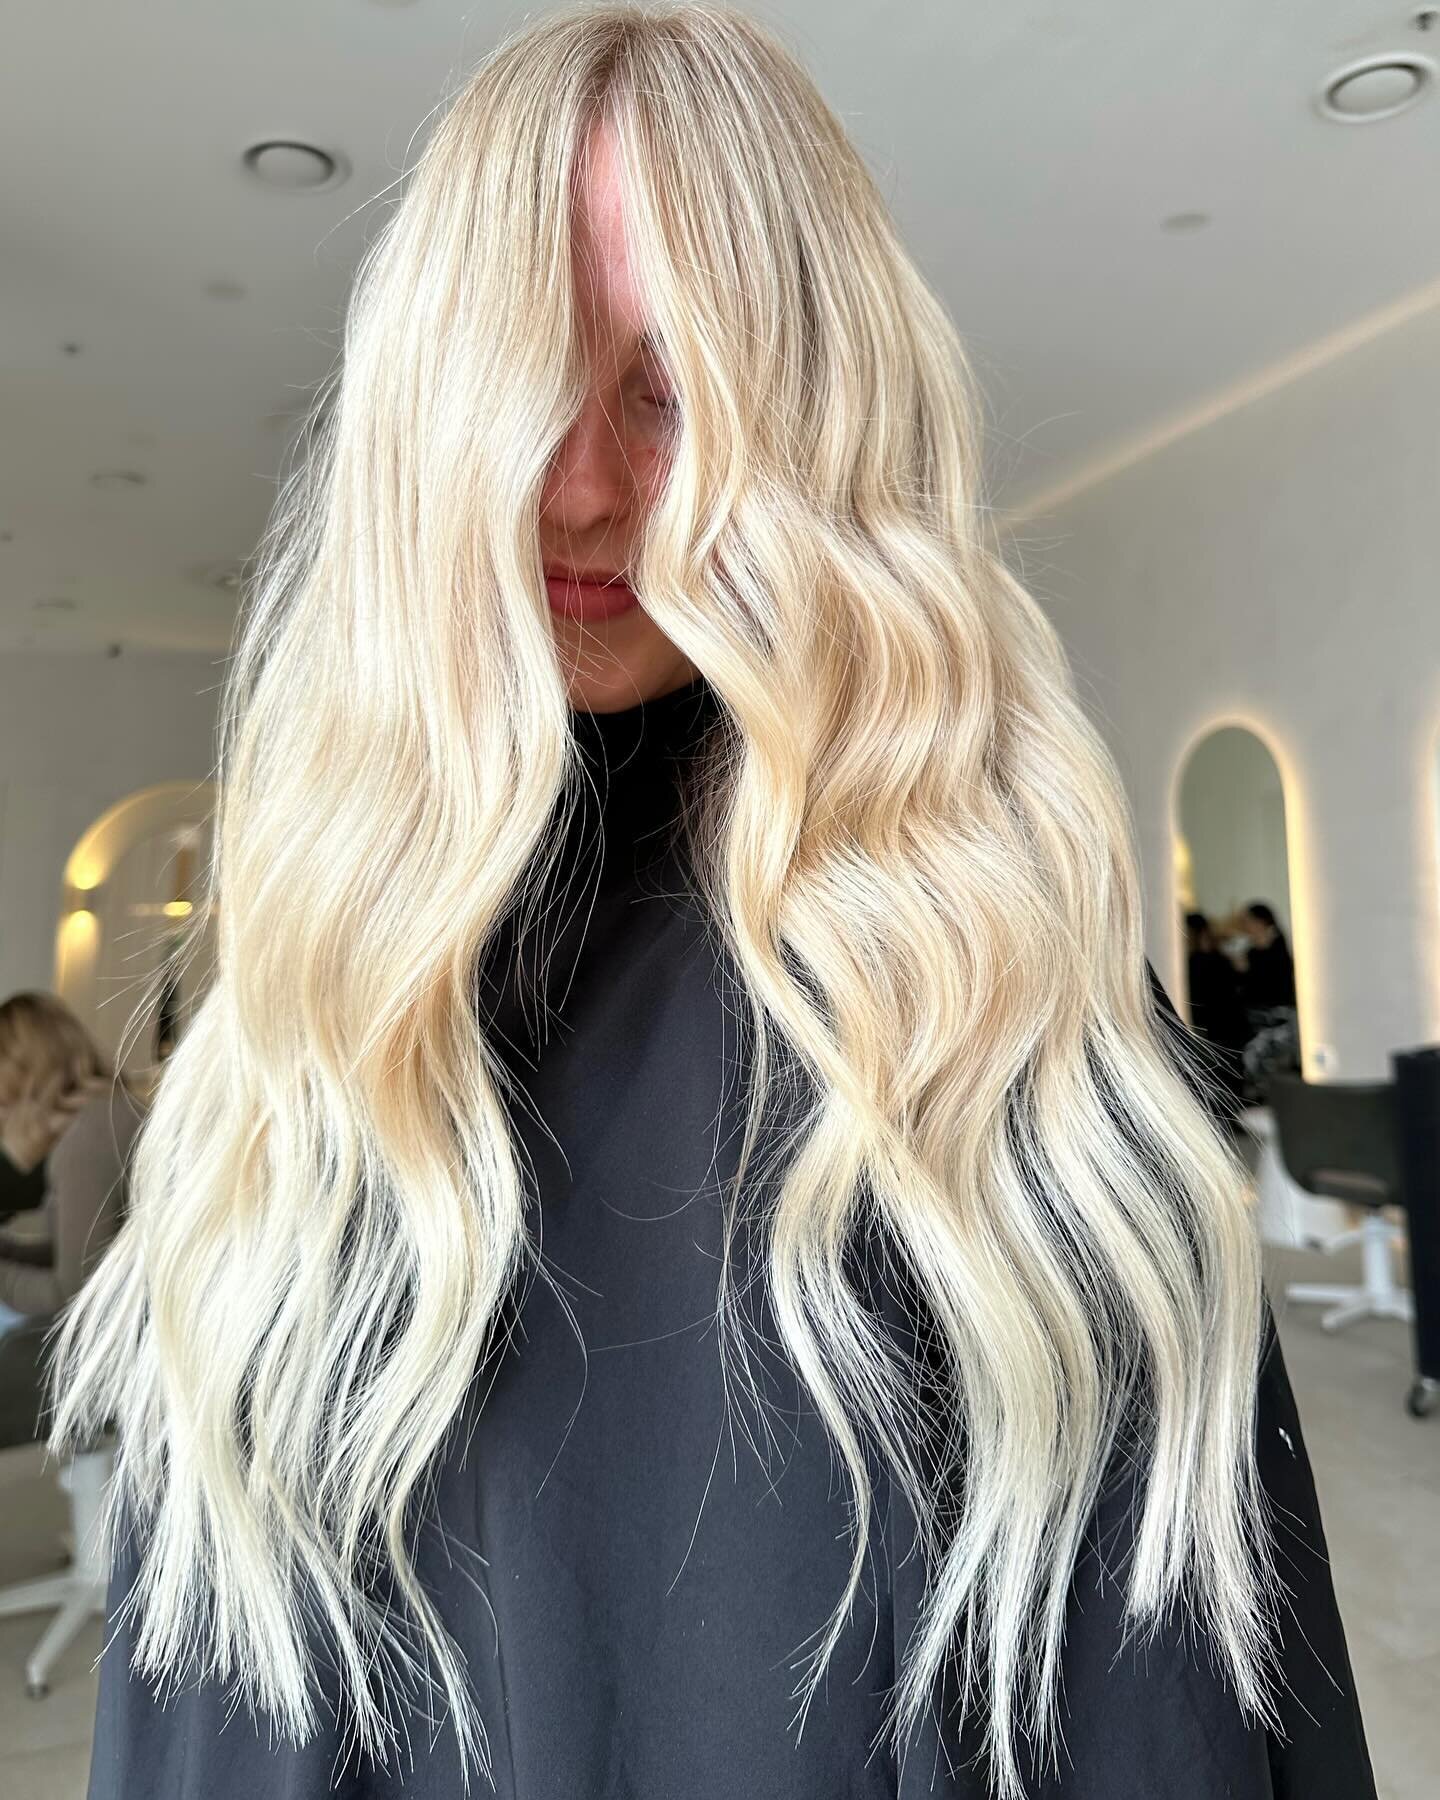 BLINDED by how bright this blonde is ✨

#blonde #brightblonde #wollongonghairdresser #blondespecialist #hairgoals